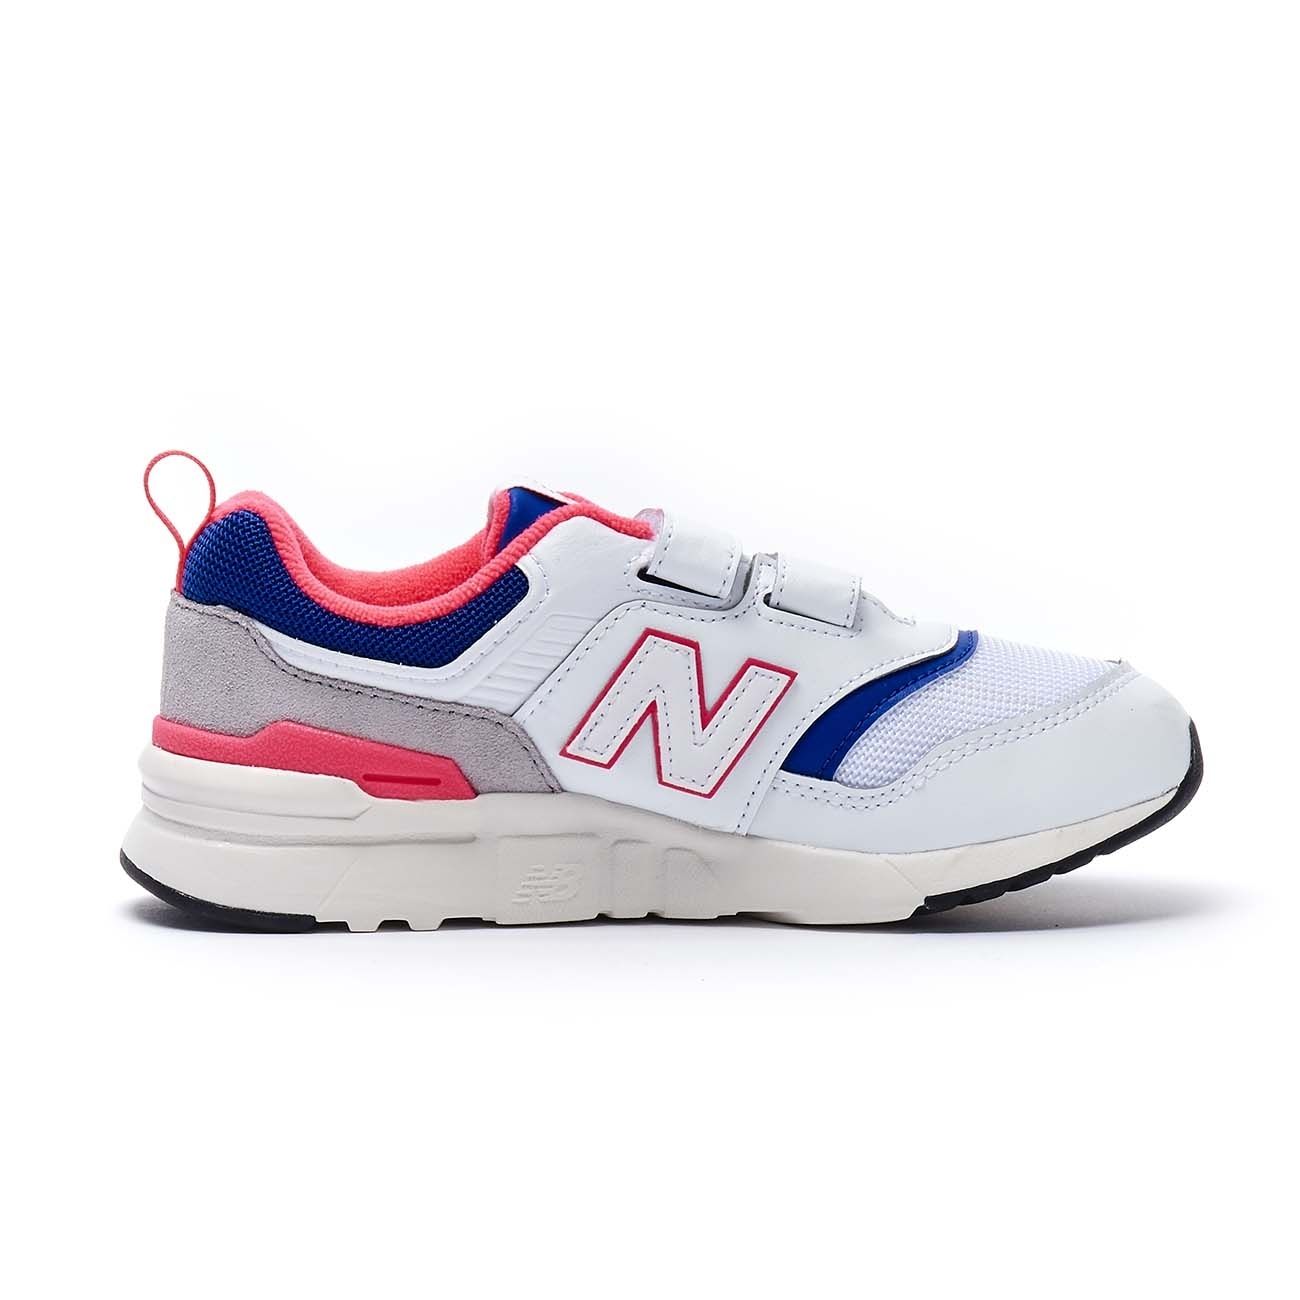 NEW BALANCE SNEAKERS 997H LIFESTYLE 